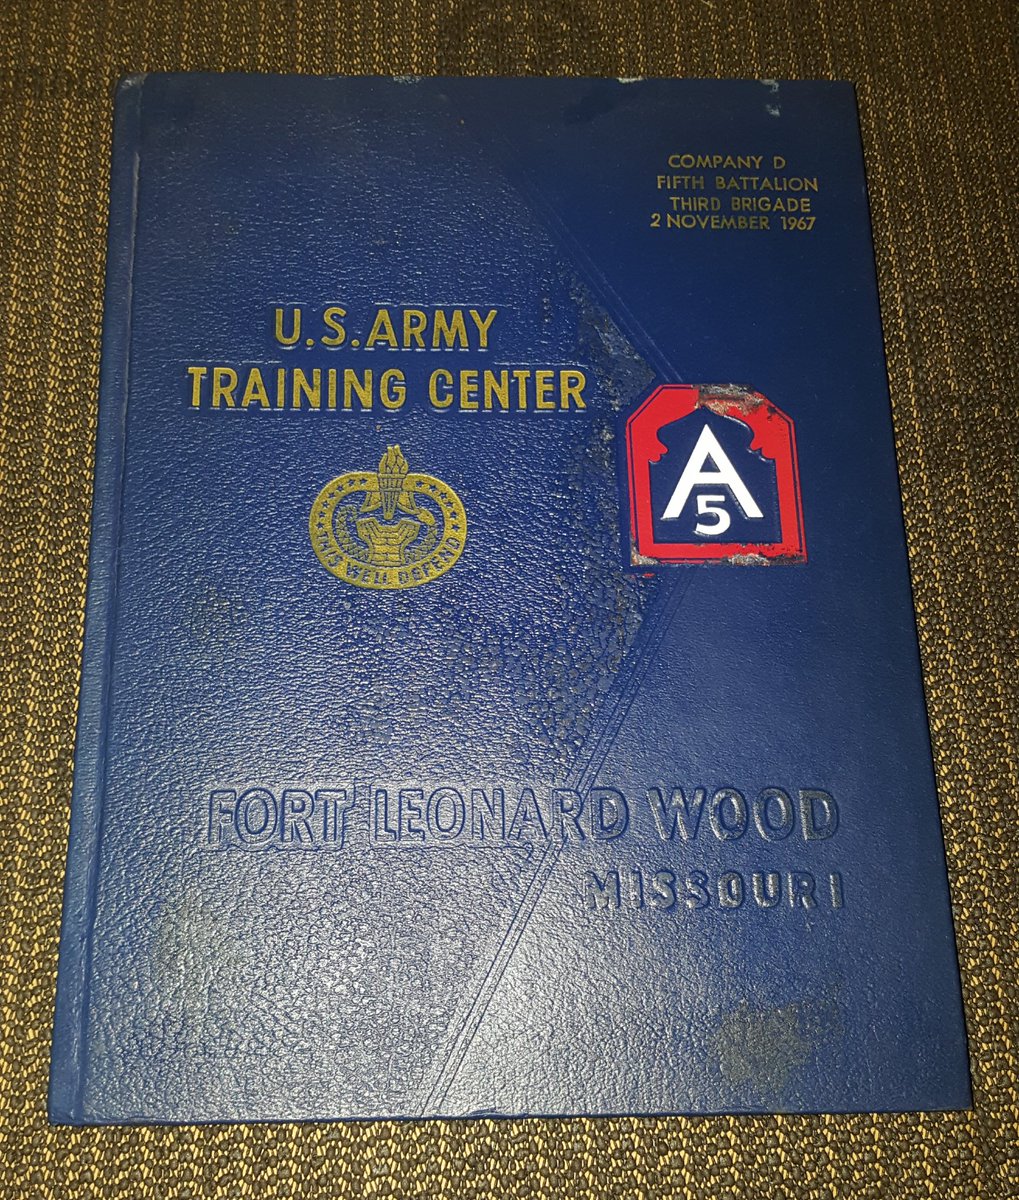 Yesterday I went to an estate sale and bought this book company d fifth battalion 3rd Brigade November 2nd 1967 basic training graduation class. Most of these guys probably went to Vietnam. Some did not come back. Photos below.